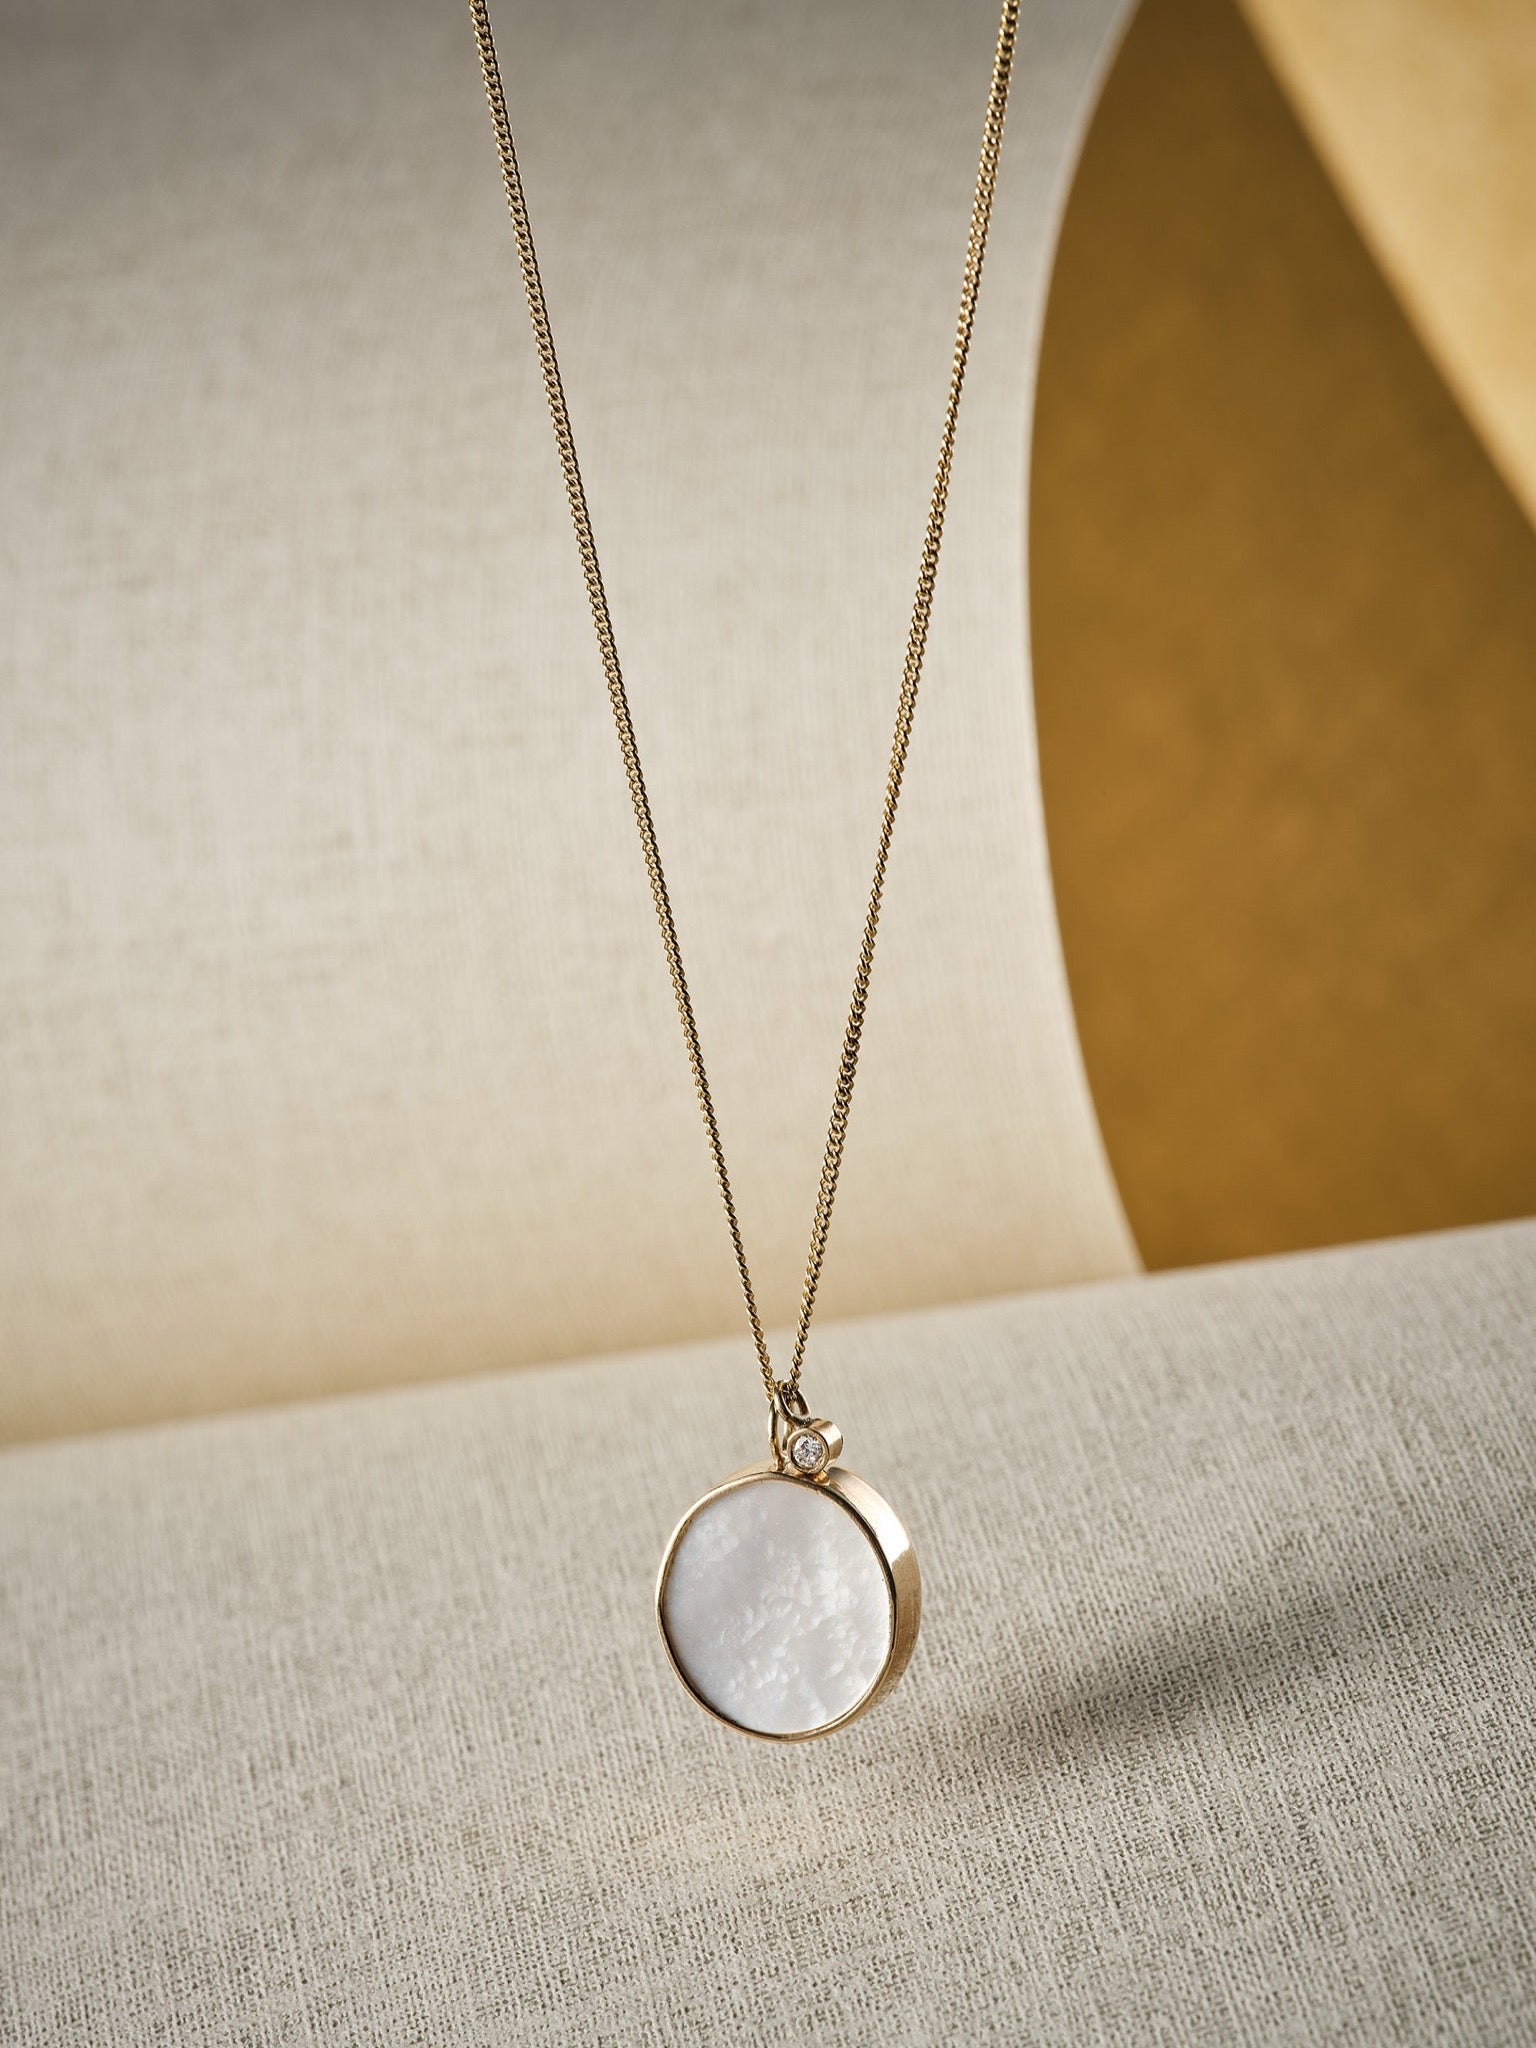 mother of pearl and gold pendant necklace lifestyle